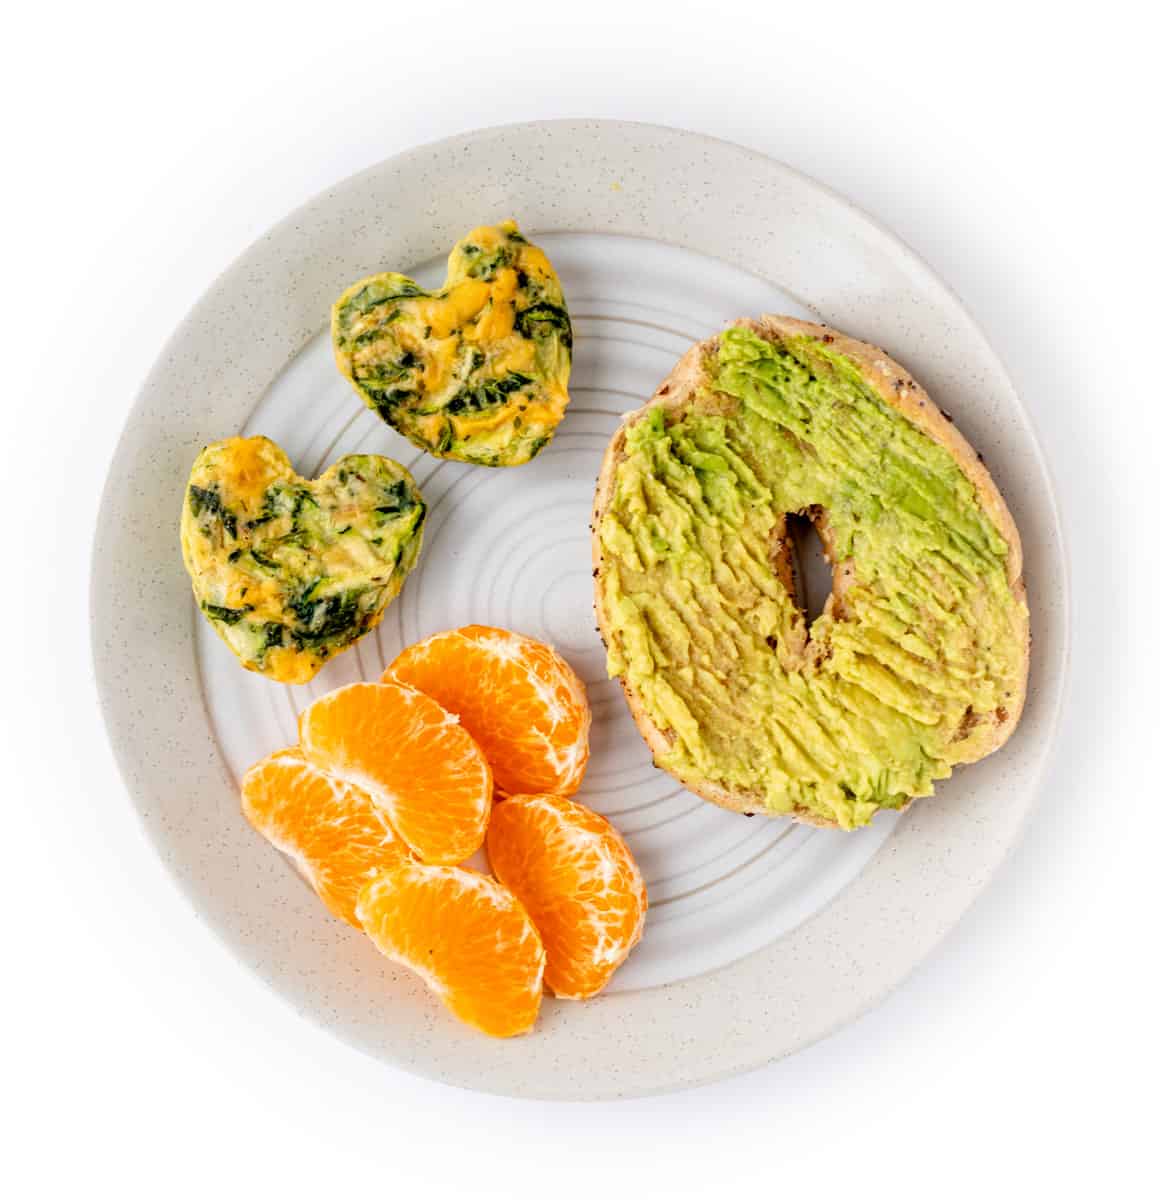 Frittata hearts with avocado mashed on a bagel with tangerine slices on a plate